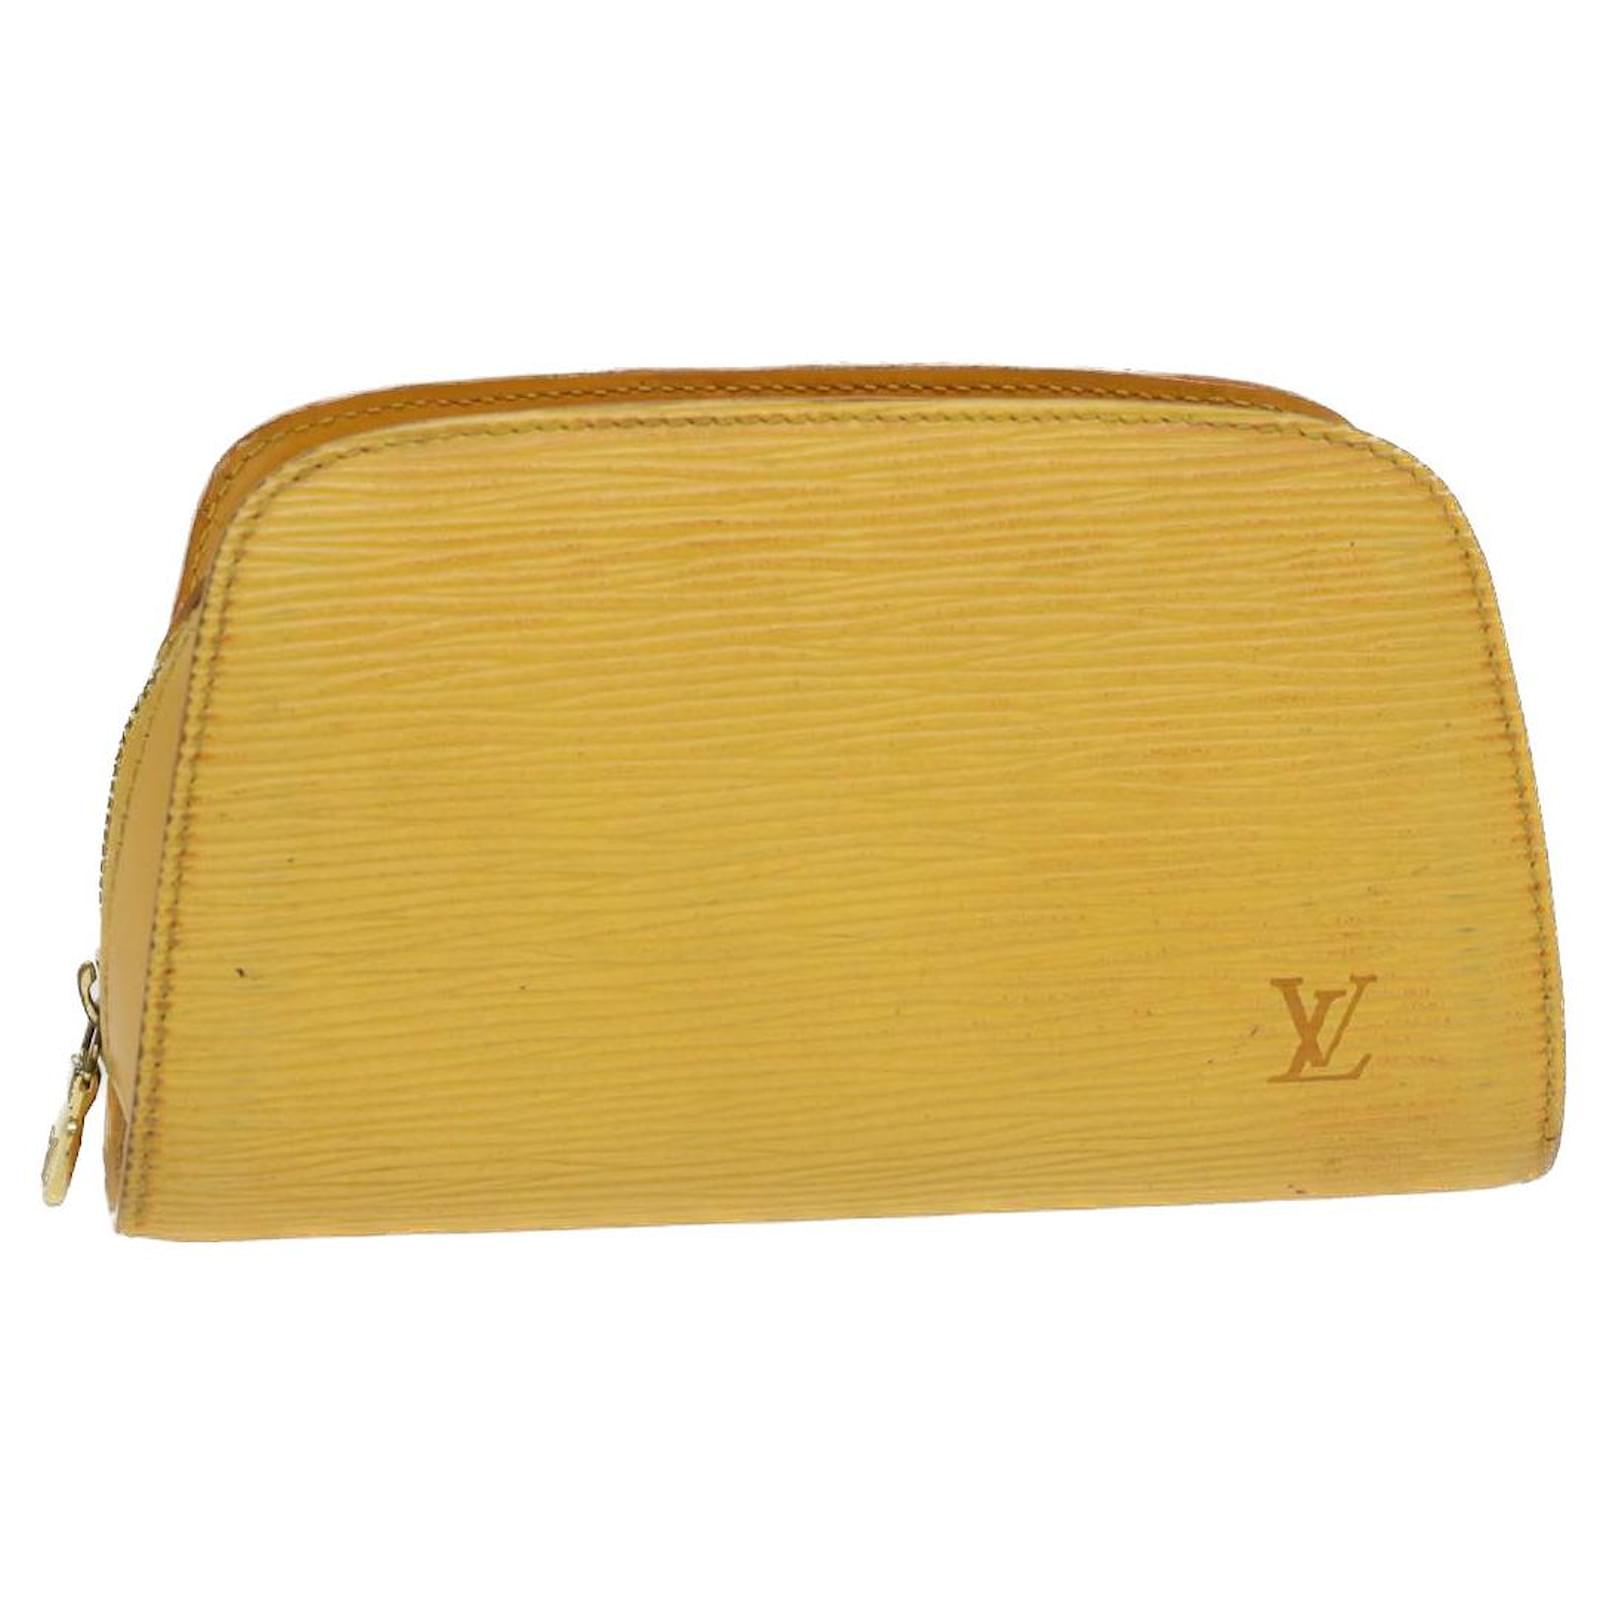 LOUIS VUITTON Epi Dauphine PM Cosmetic Pouch Yellow M48449 LV Auth